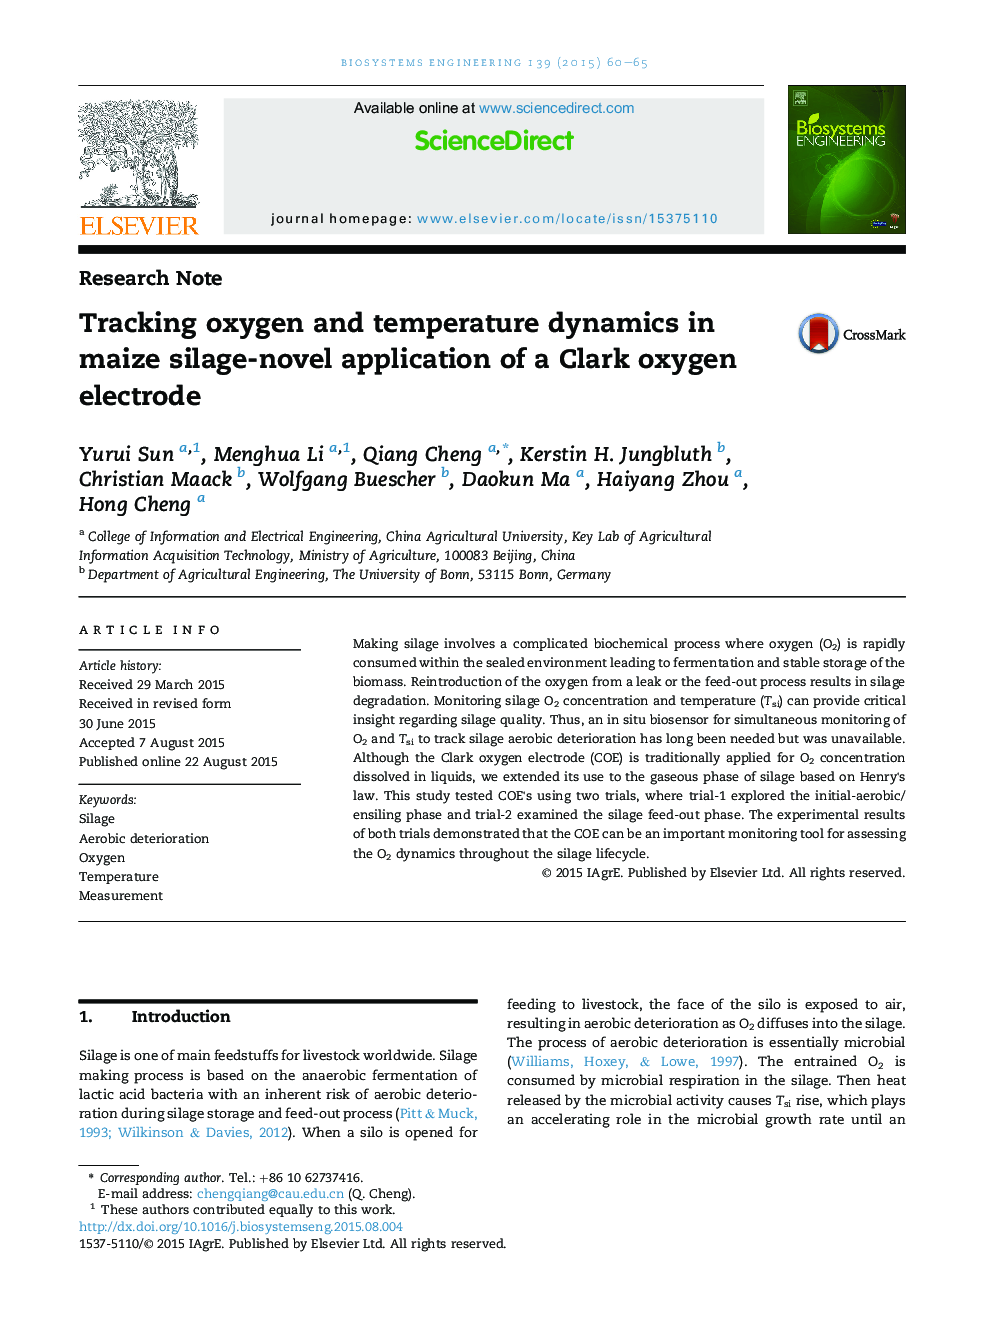 Tracking oxygen and temperature dynamics in maize silage-novel application of a Clark oxygen electrode